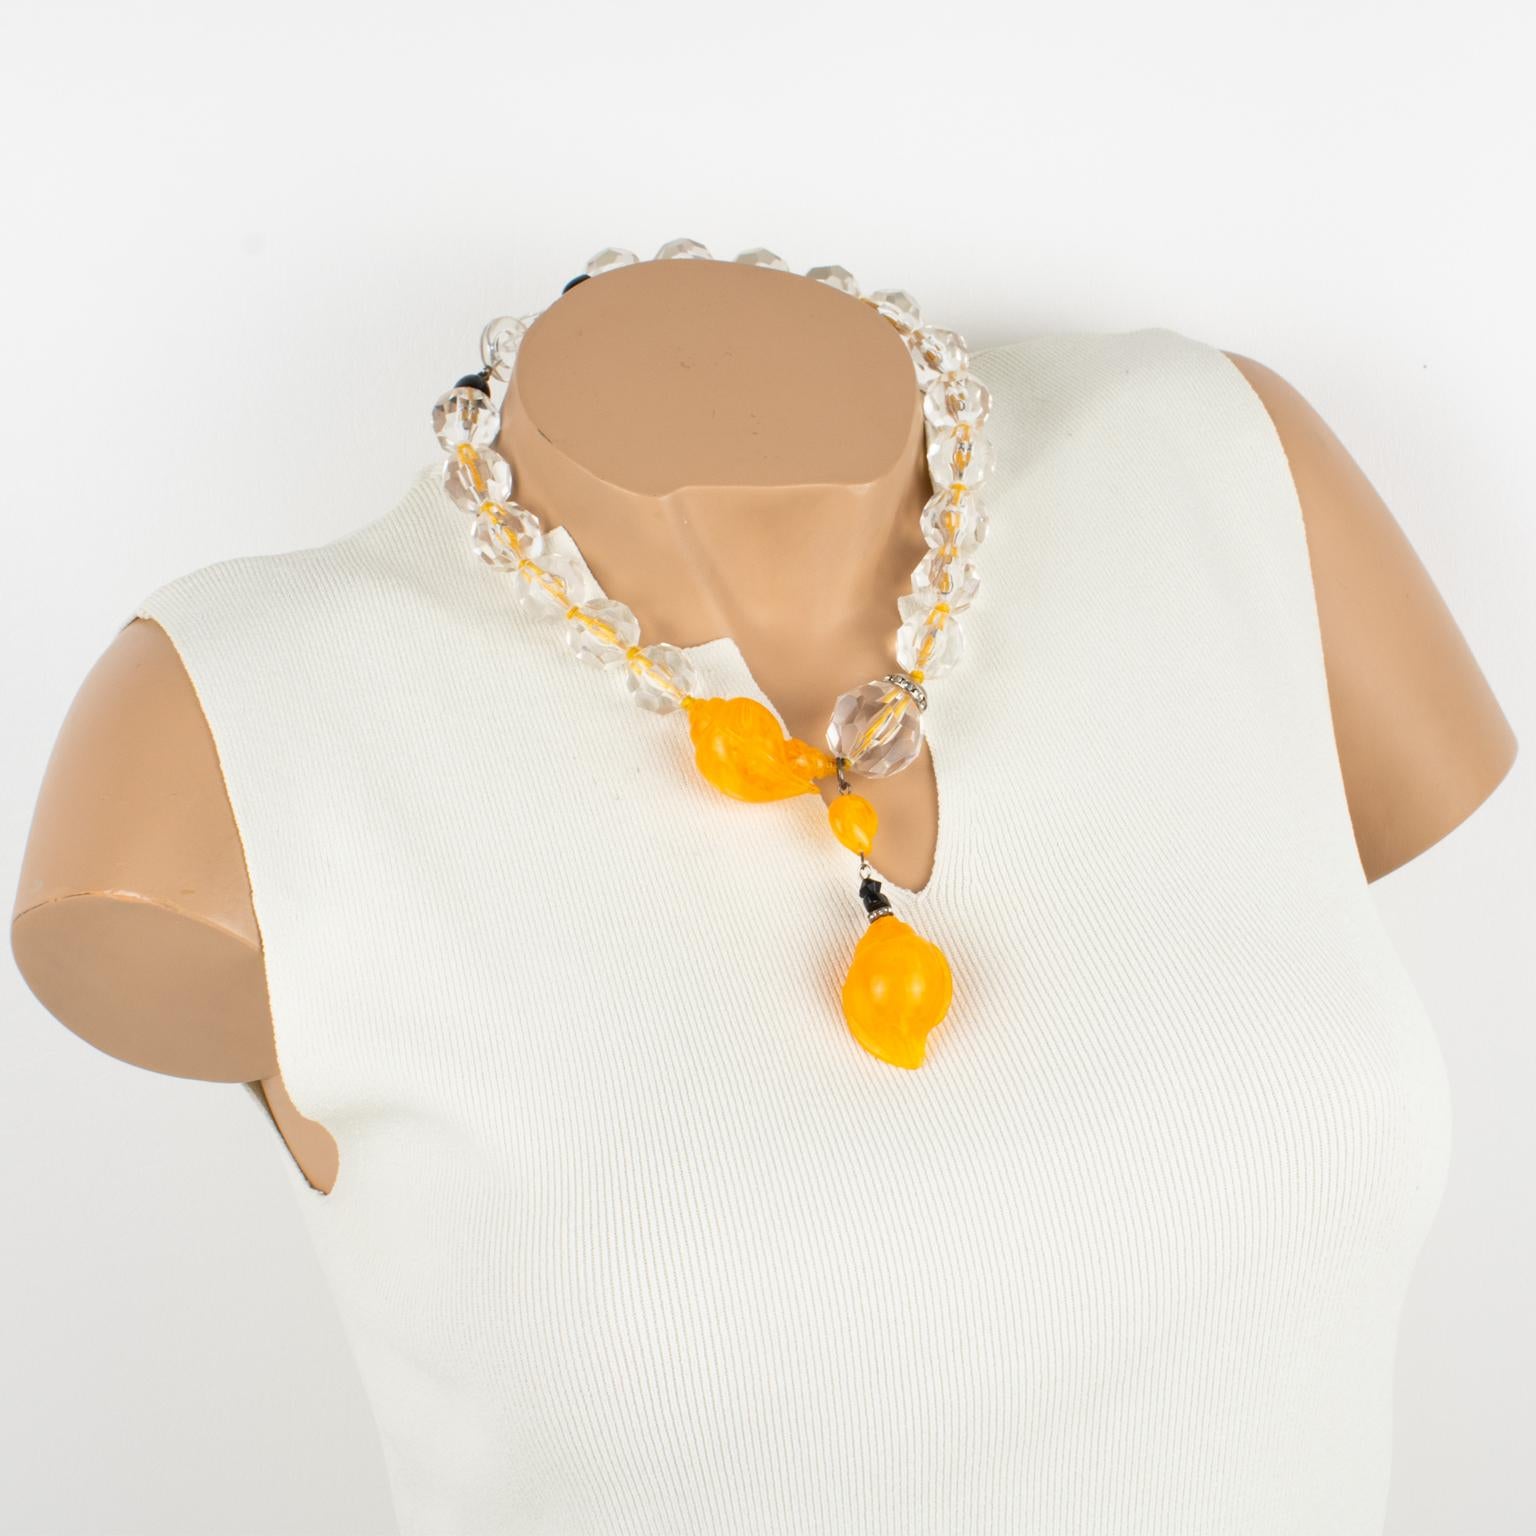 Angela Caputi designed this superb resin choker necklace. This necklace features a set of faceted beads in crystal clear color contrasted with an asymmetric pendant built with orange marble seashell elements. The choker boasts a bright orange thread